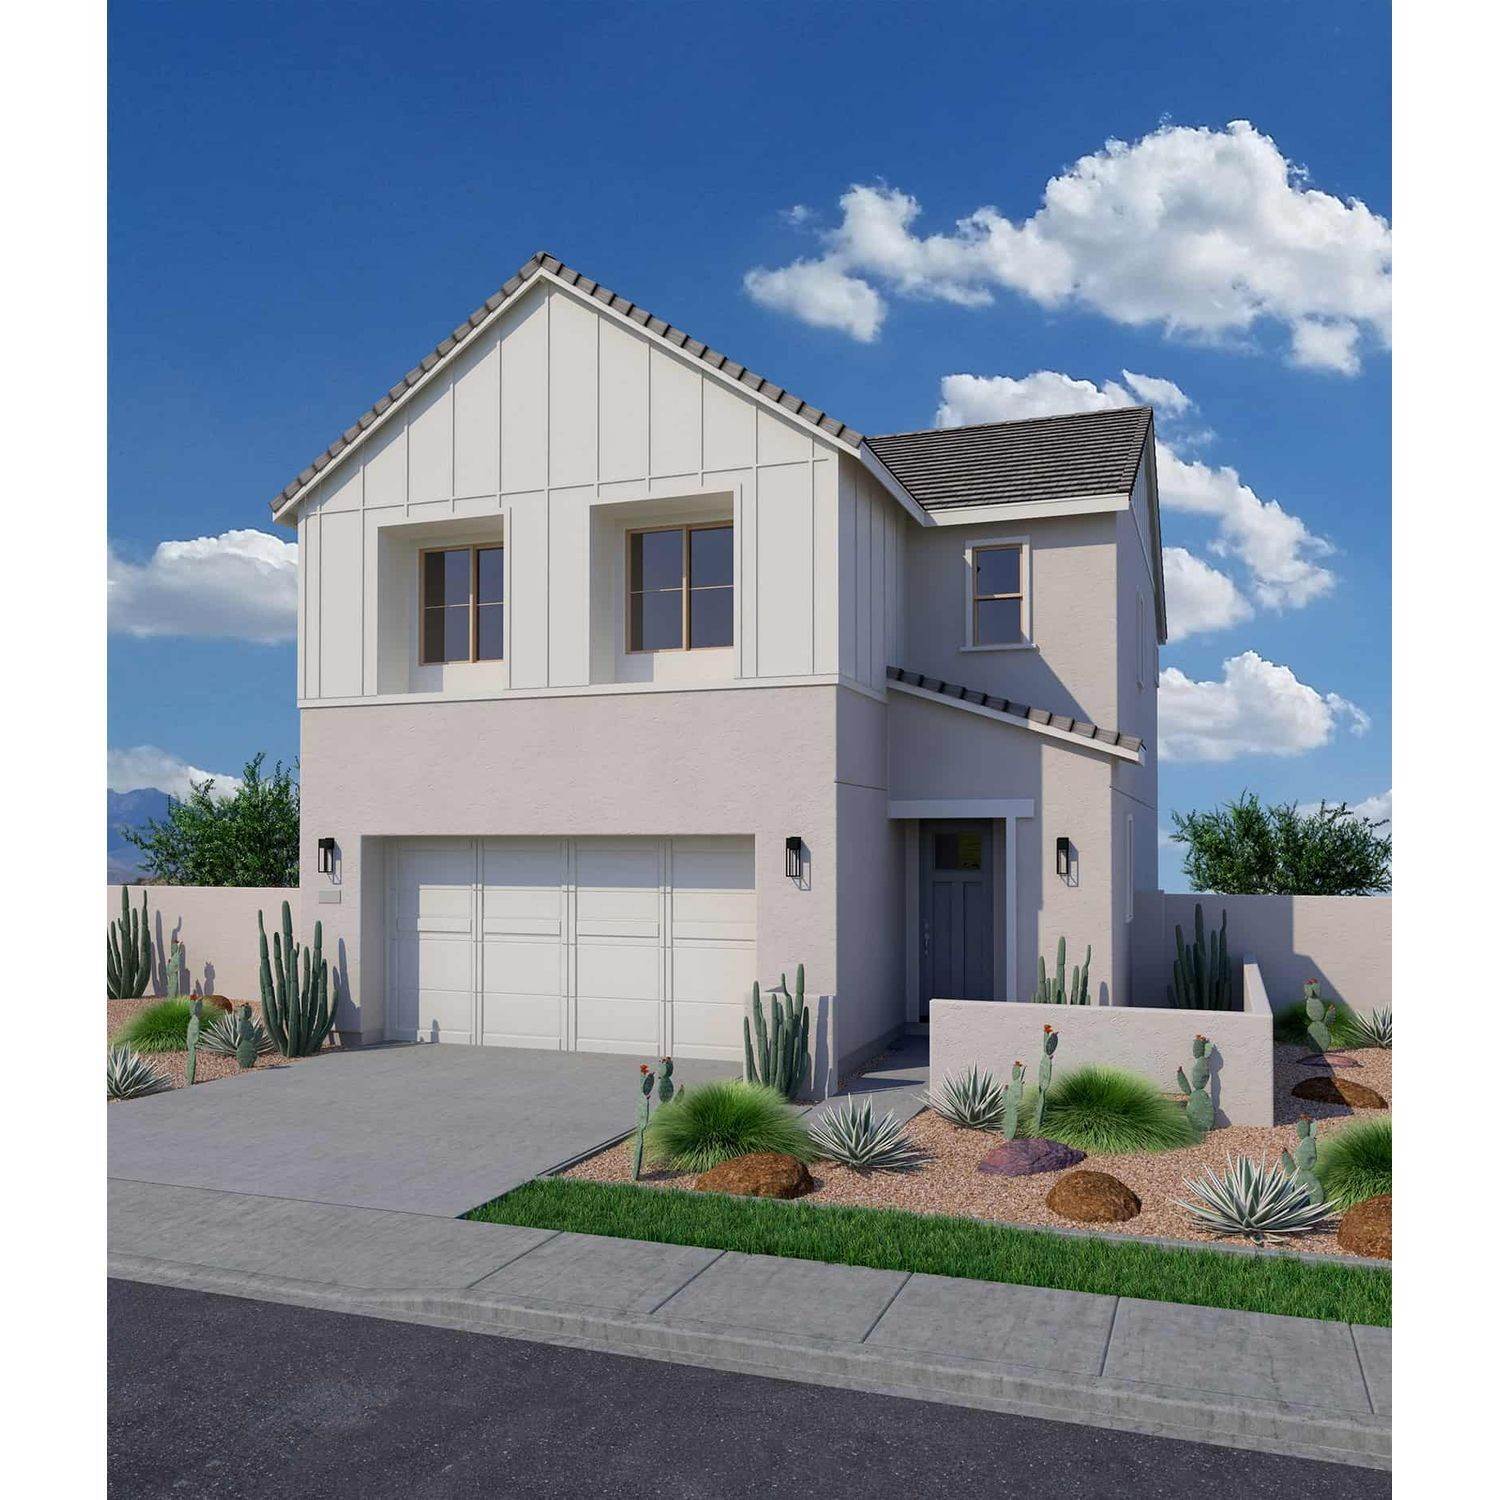 2. Single Family for Sale at Cadence 5751 S. Labelle, Mesa, AZ 85212